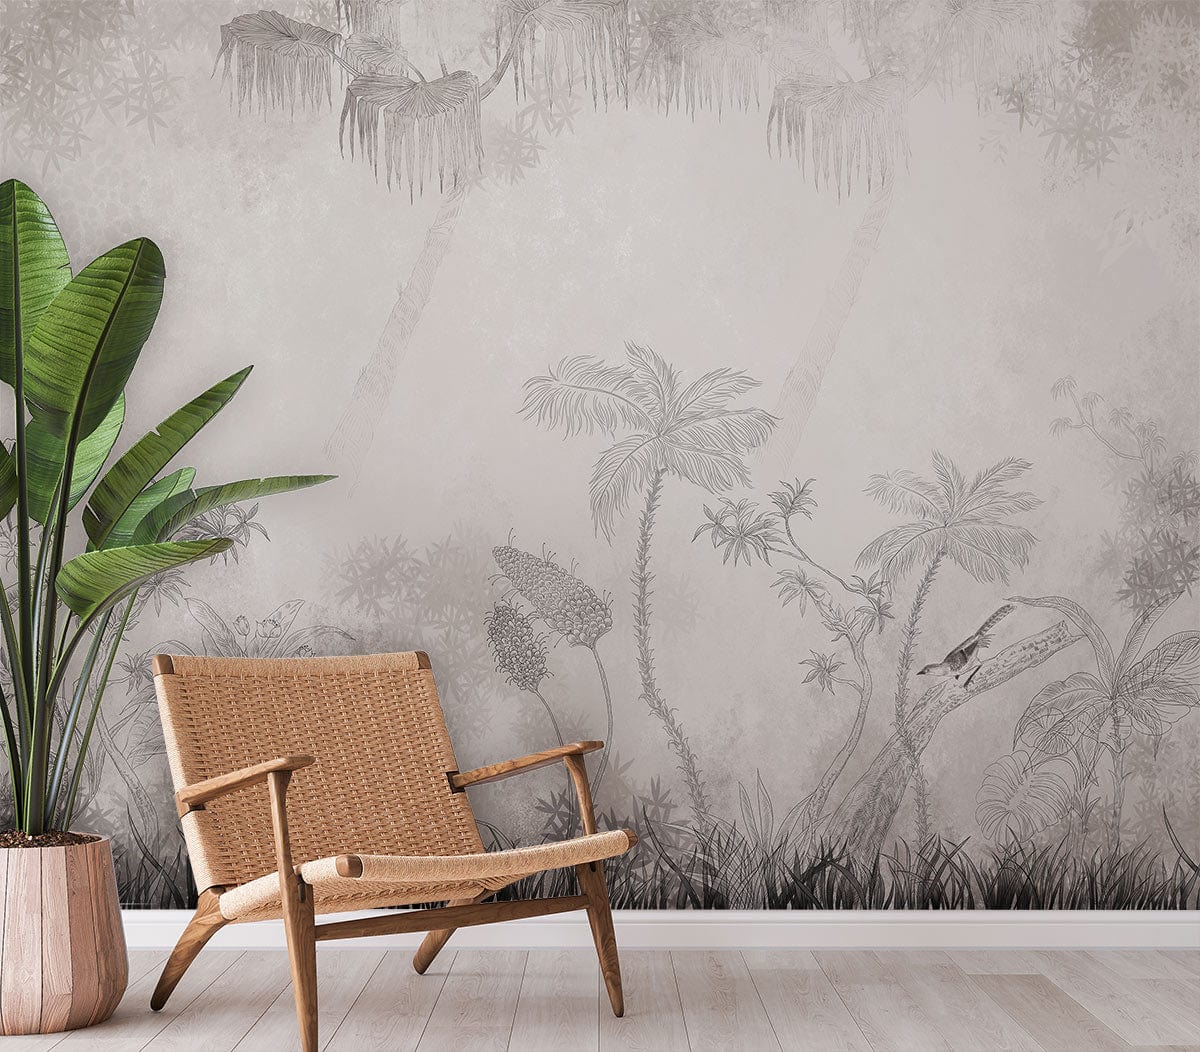 Mural wallpaper in the living room with a grey forest motif